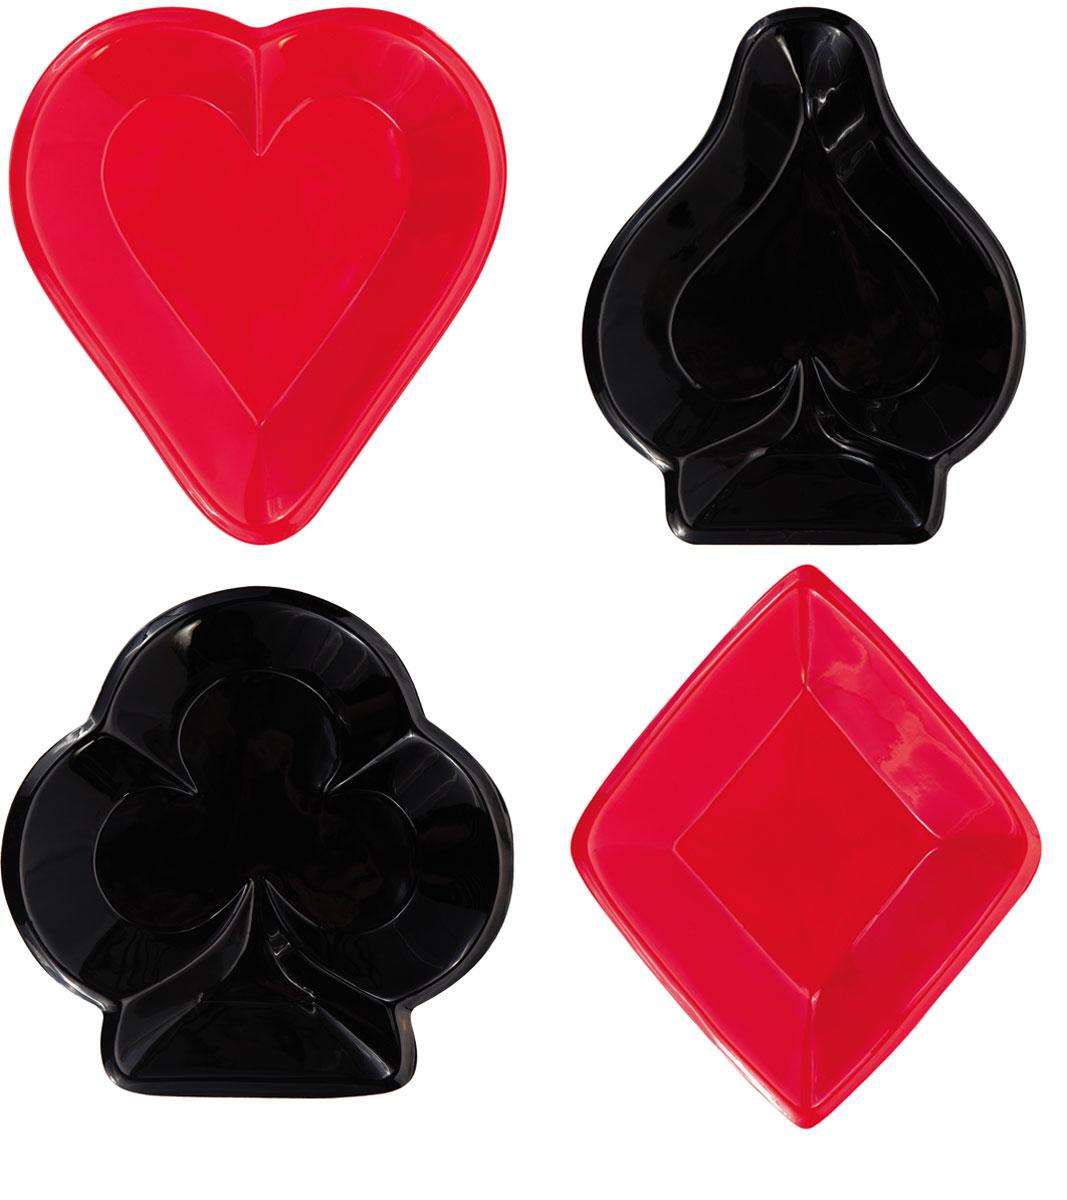 Card Suit Mini Serving Tray in all designs by Creative Party with 19189 Hearts, 19032 Spades, 19130 Clubs and 19031 Diamonds available here at Karnival Costumes online party shop